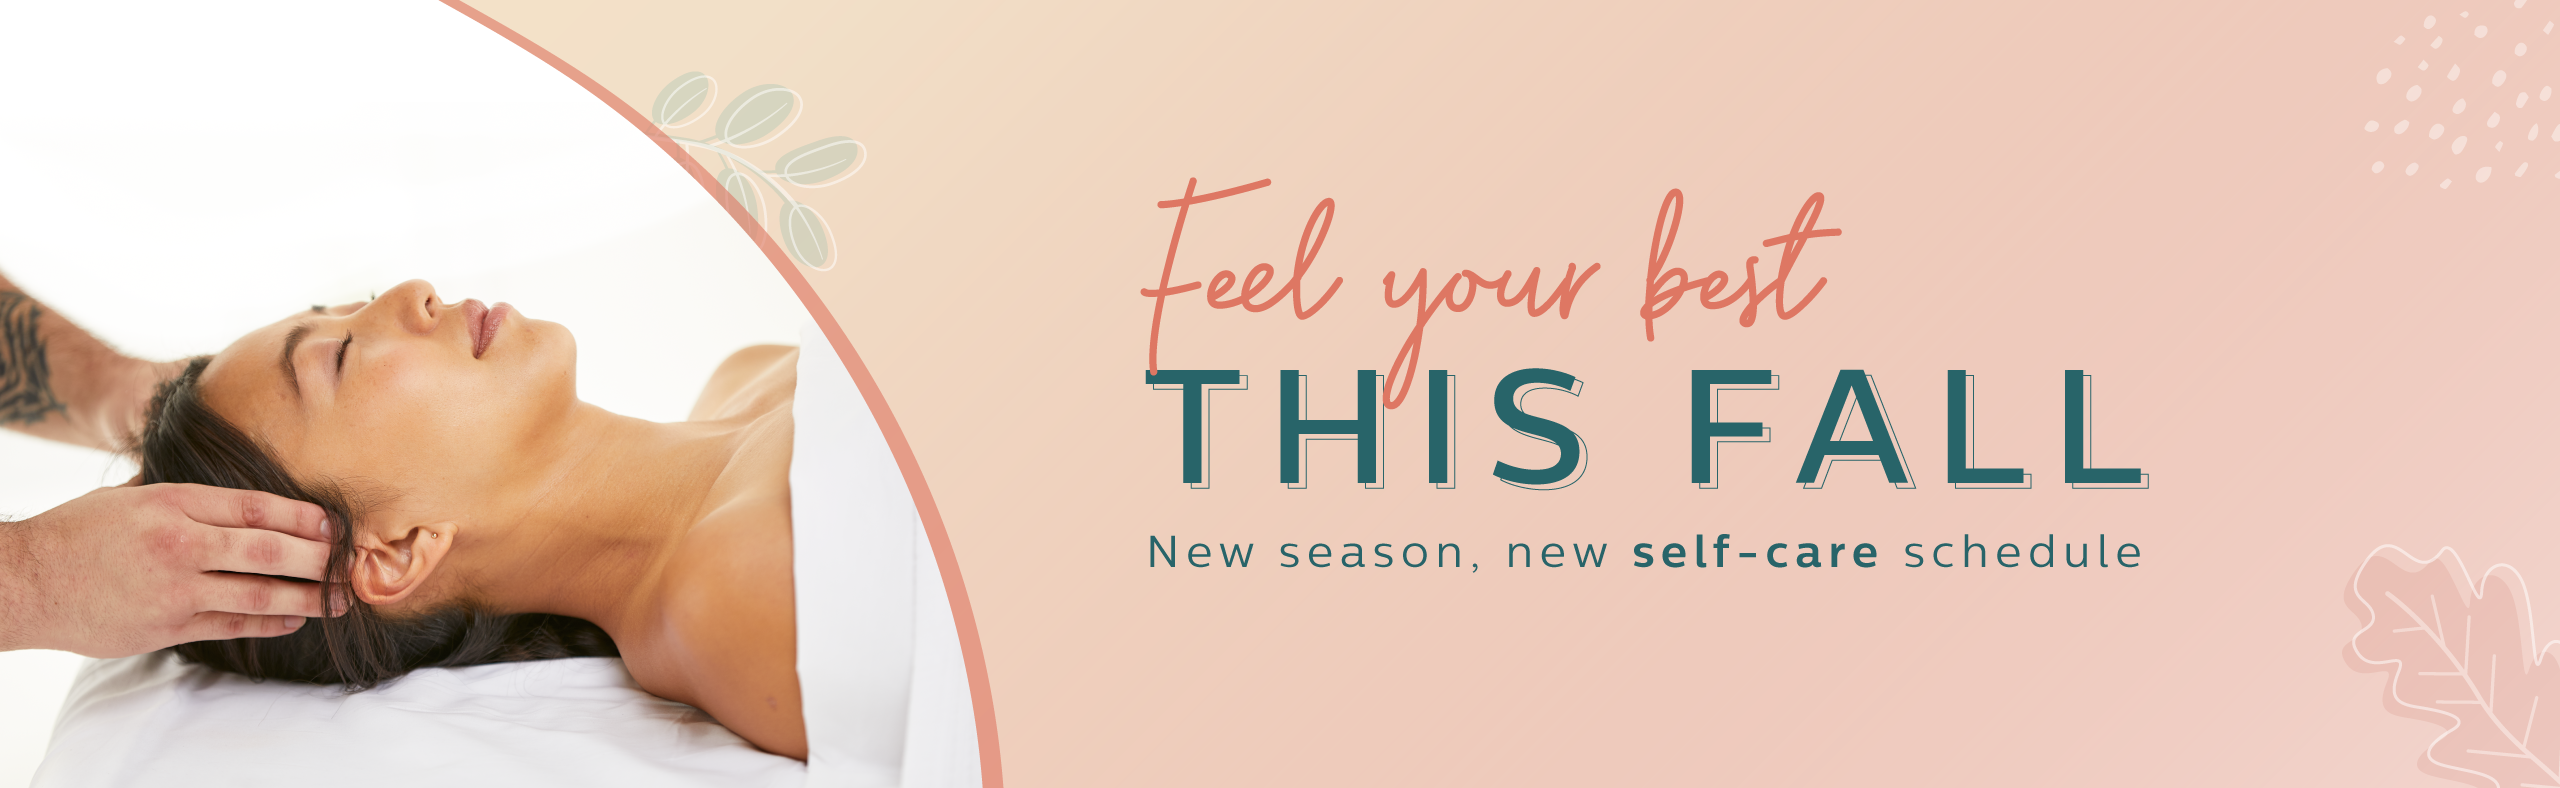 Feel your best this fall.